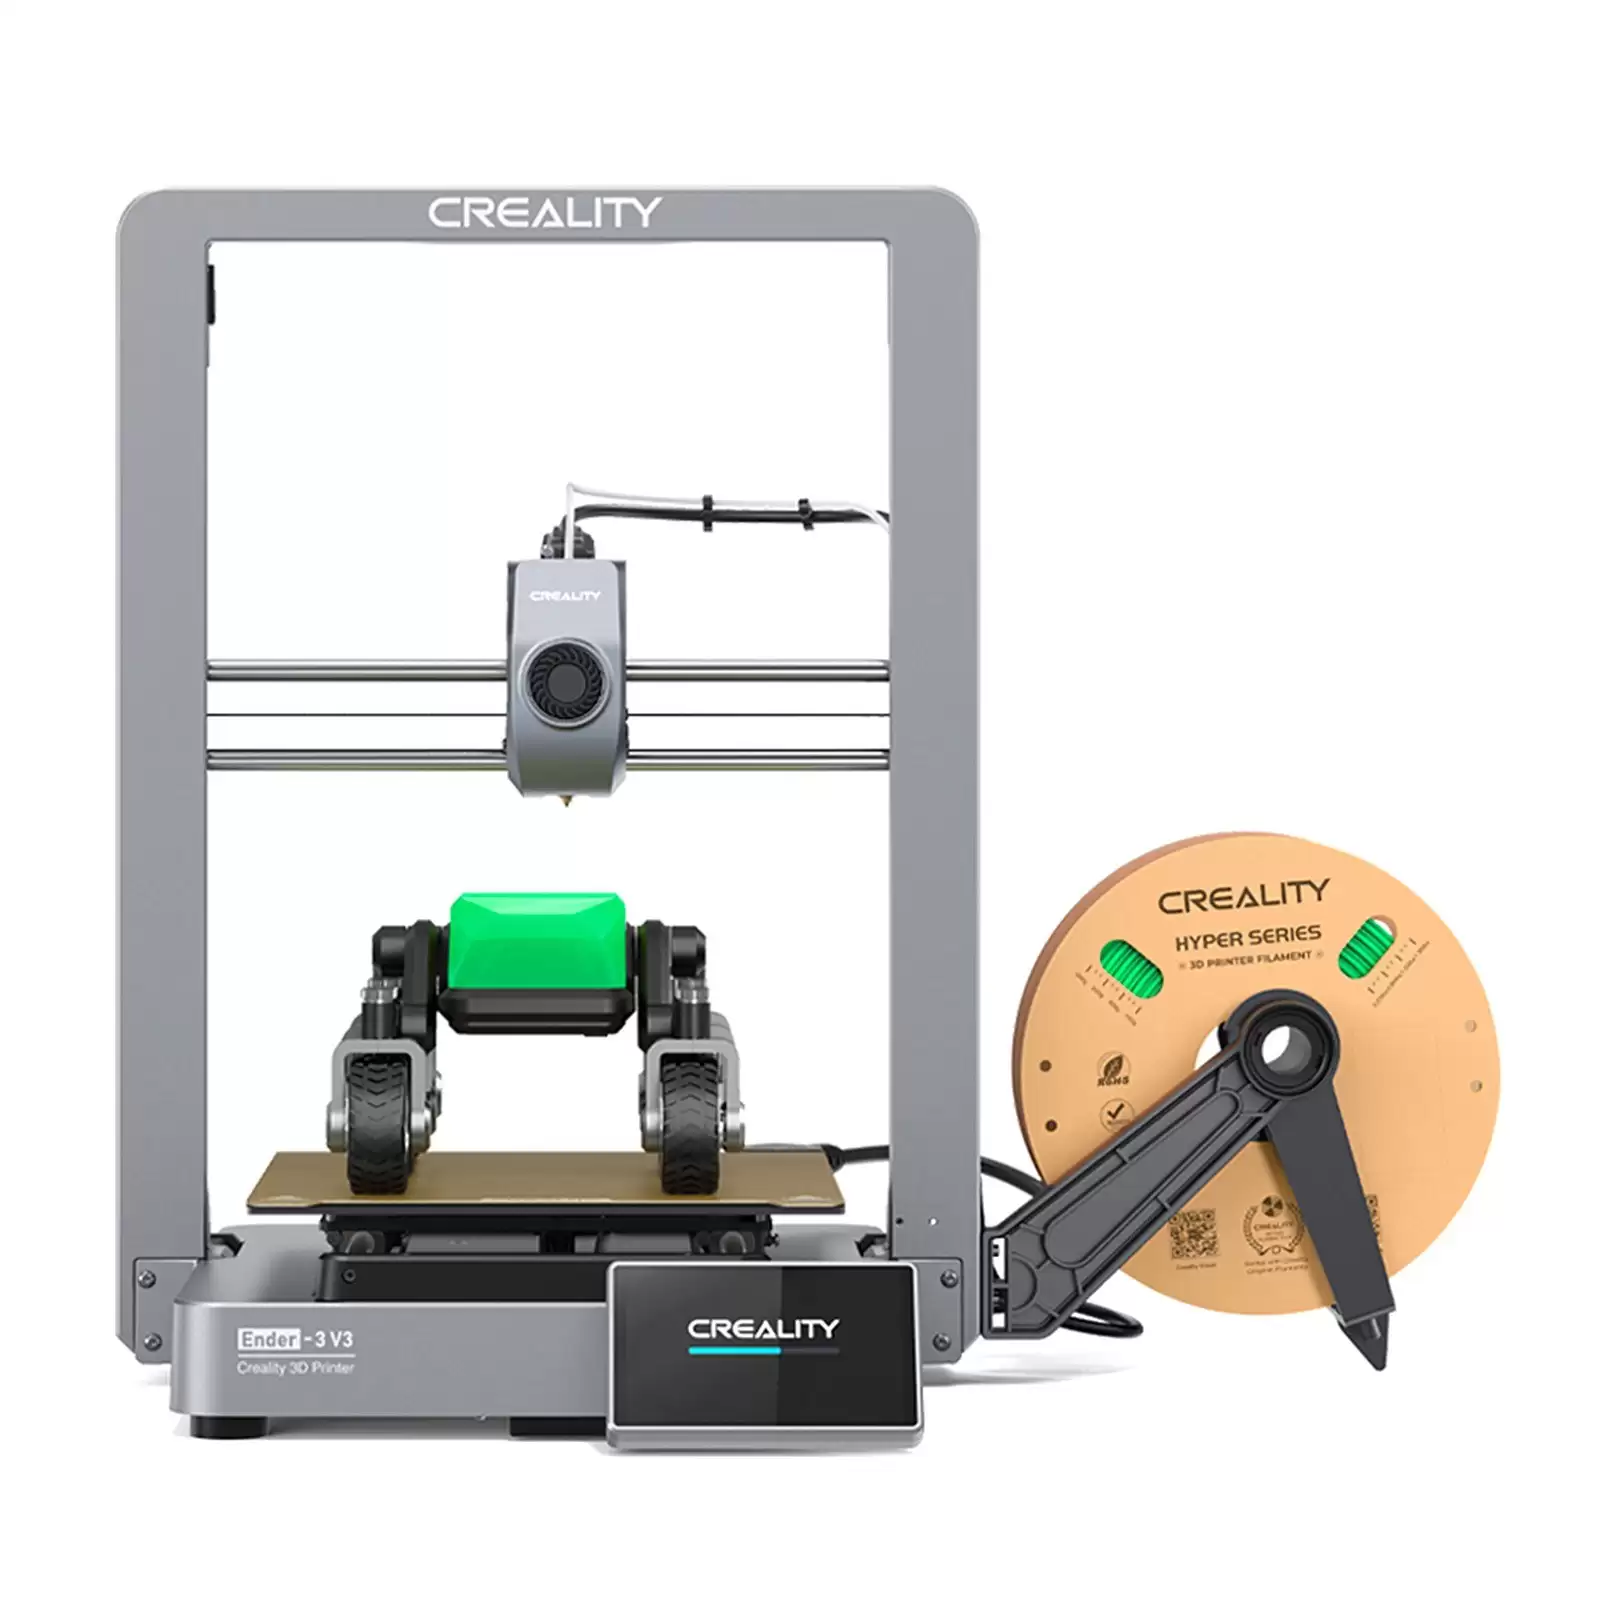 Order In Just $316 Creality Ender-3 V3 3d Printer Auto-Leveling 600mm/S Max Printing Speed